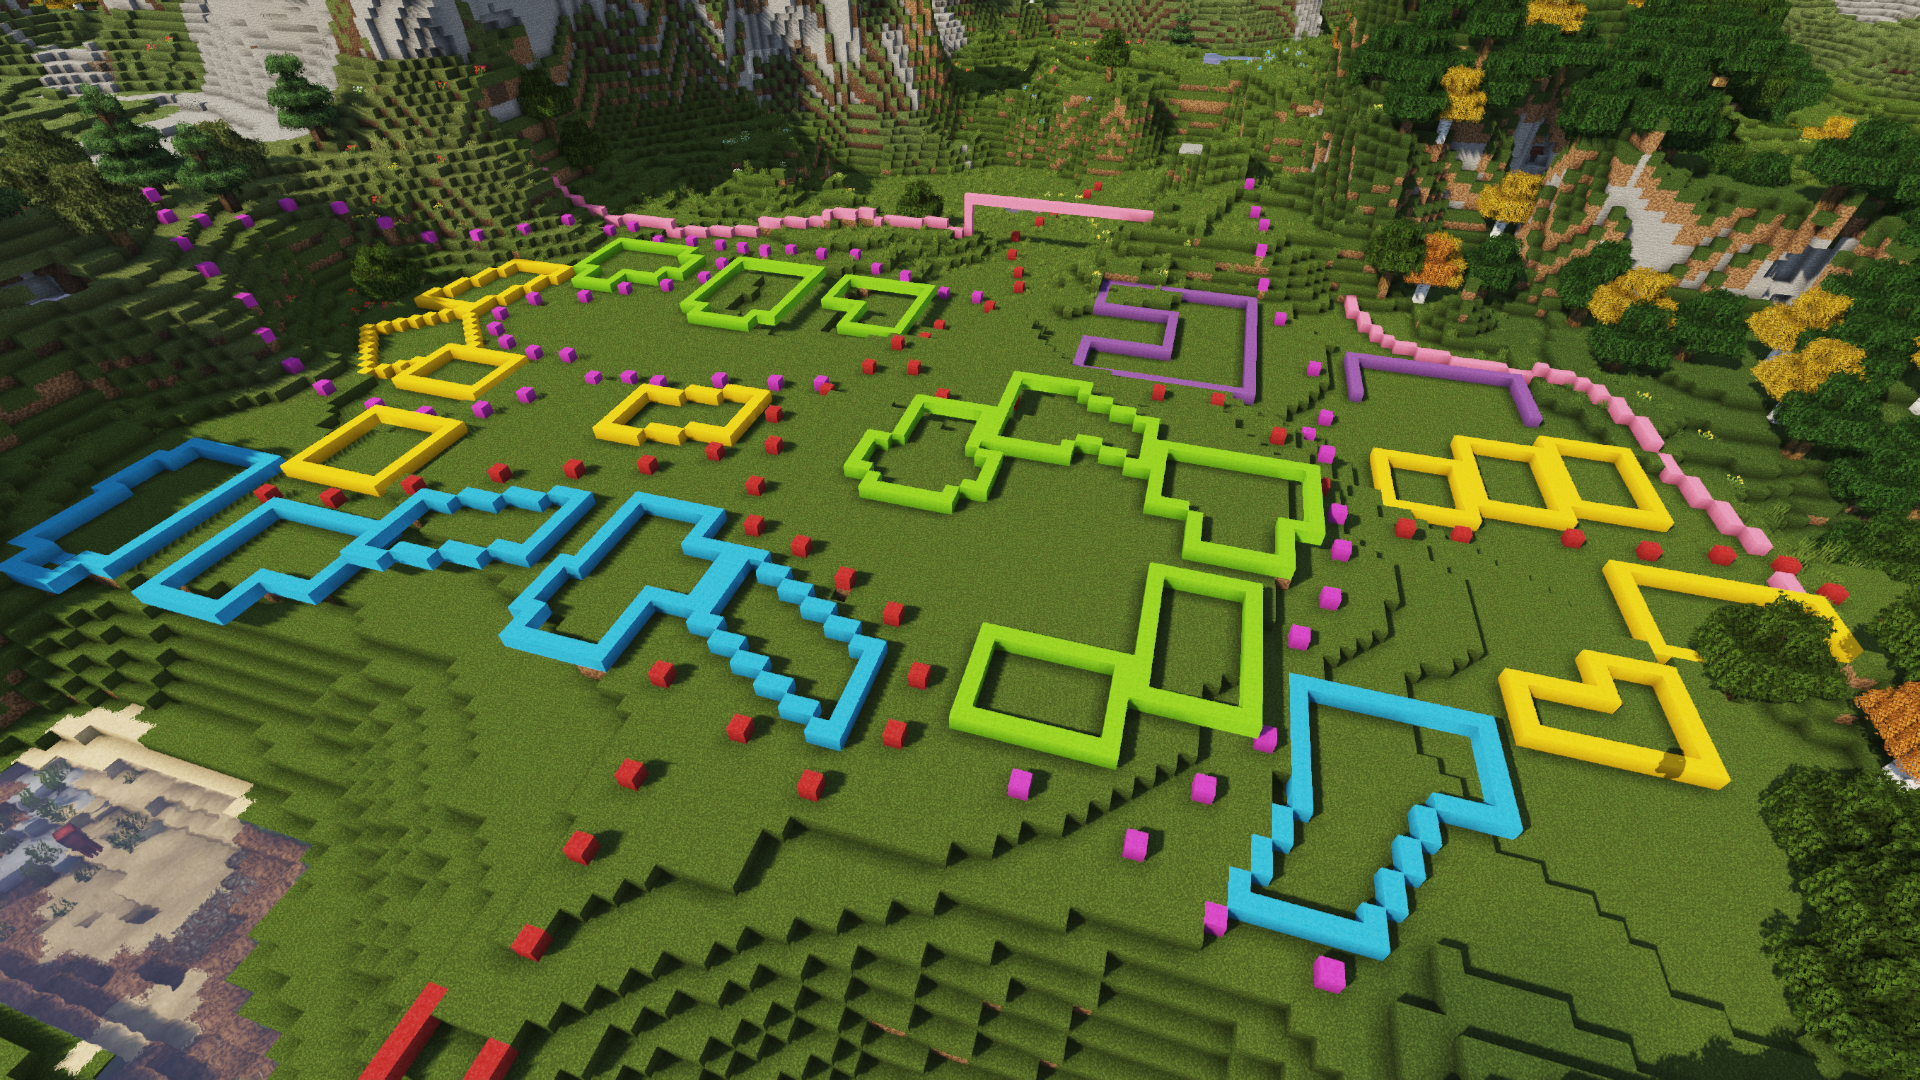 Minecraft: How To Plan and Build An Awesome Village